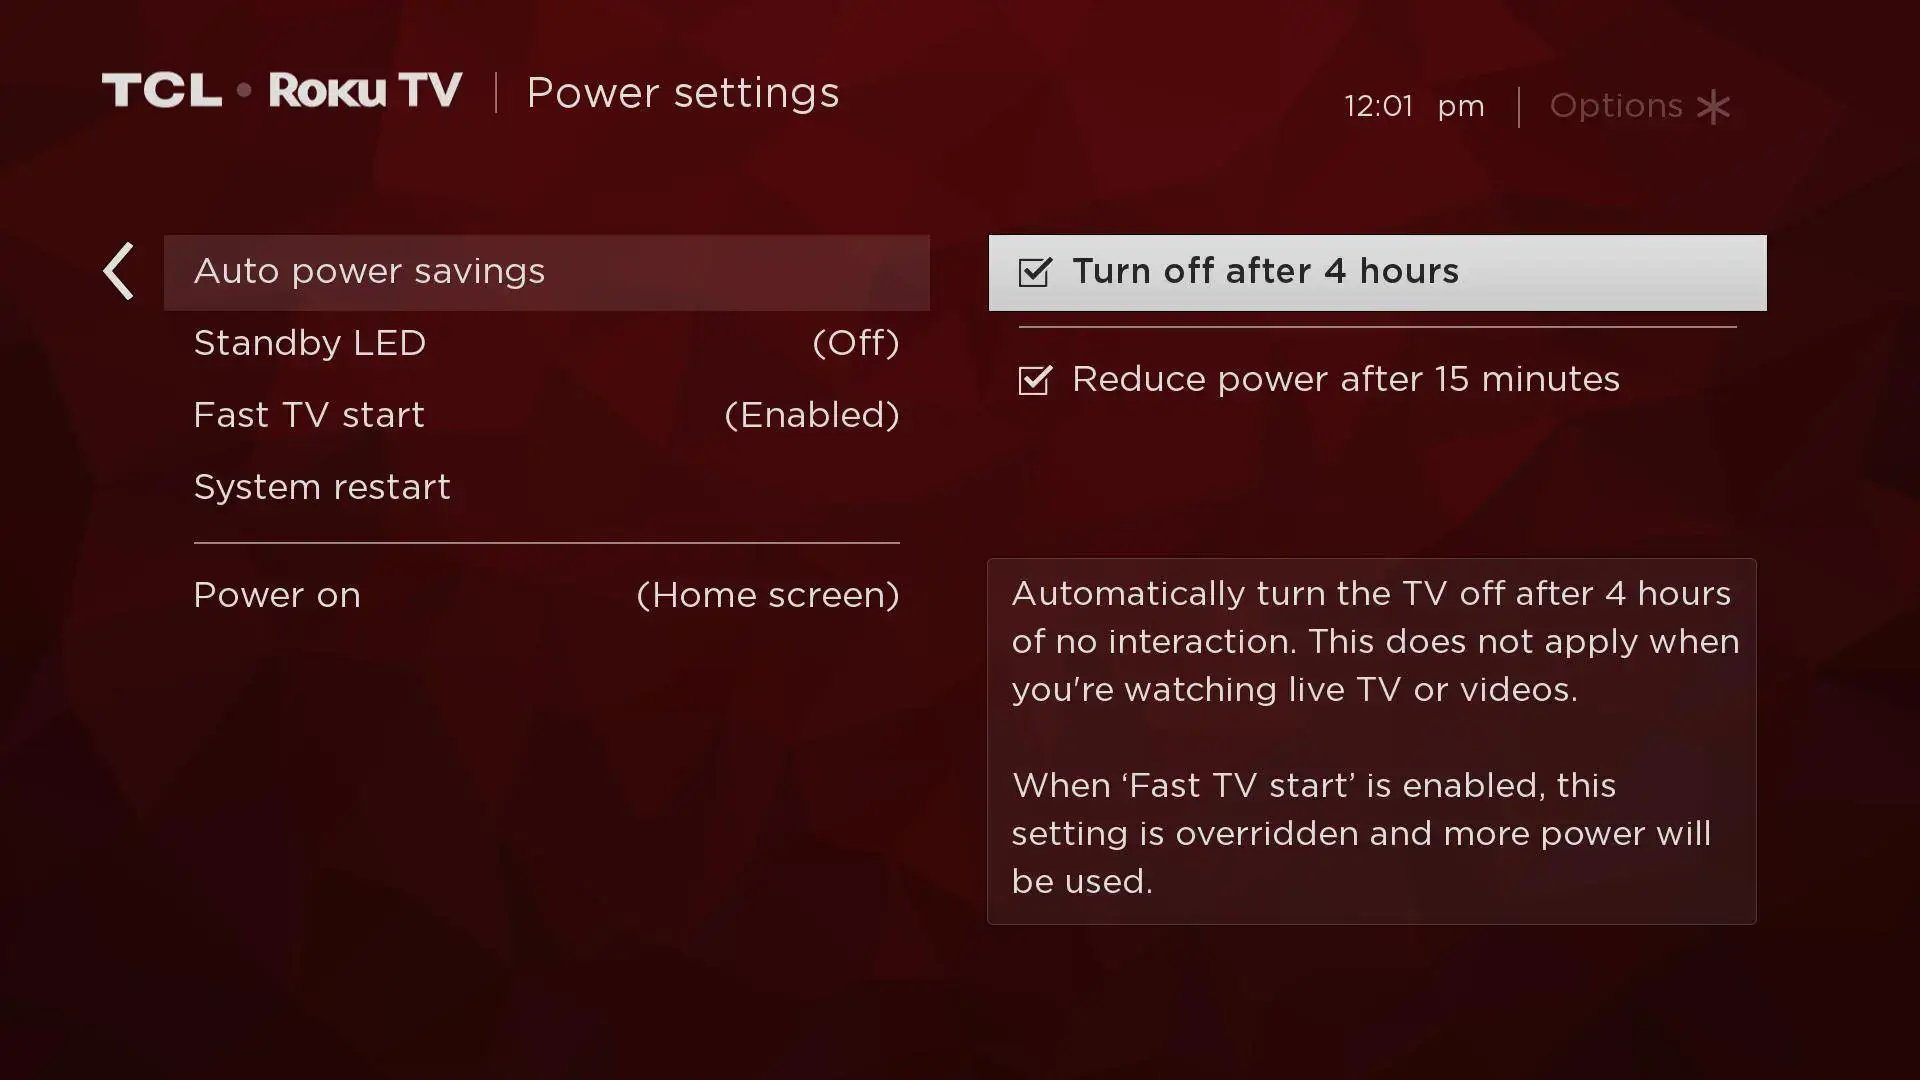 Turn off TCL Roku TV after 4 hours